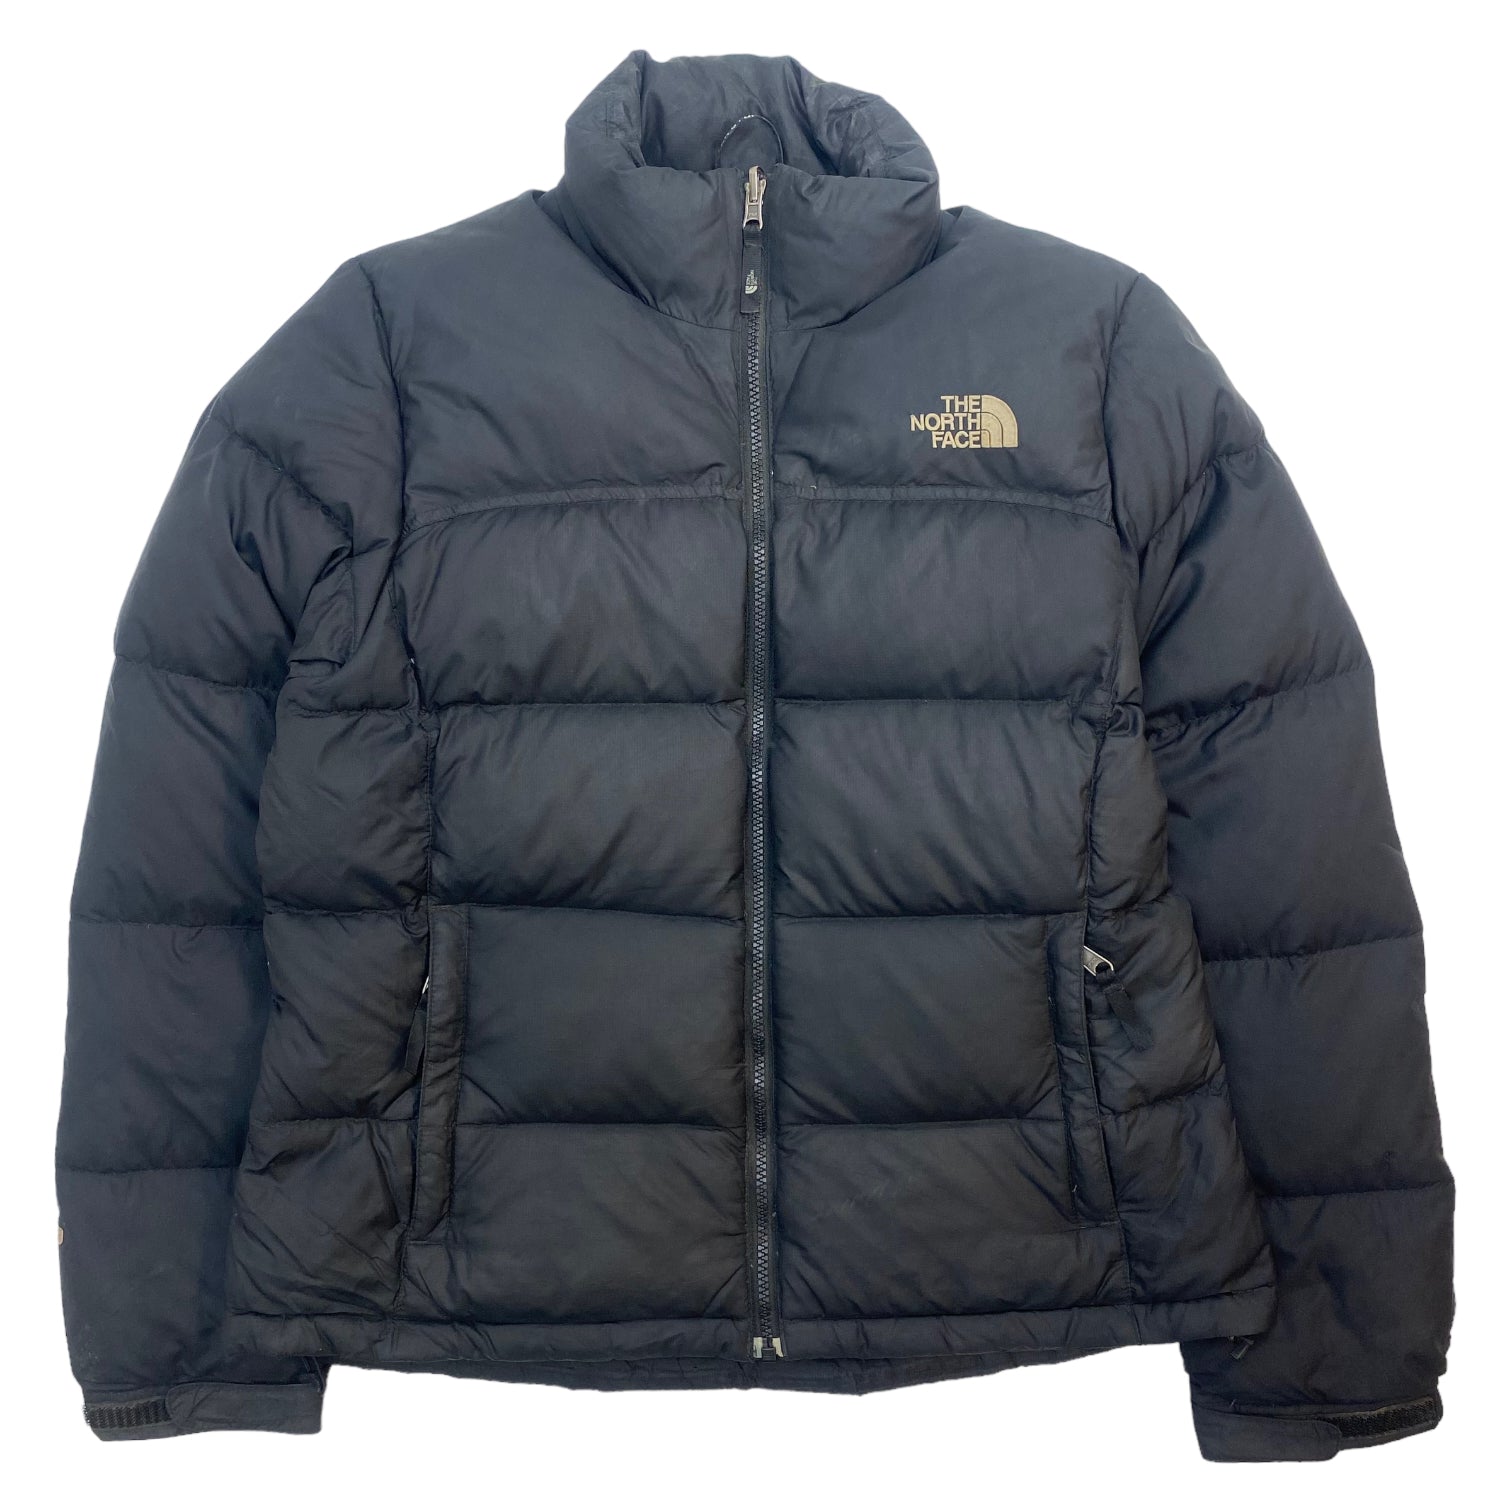 The North Face Women’s 700 Fill Jacket Black